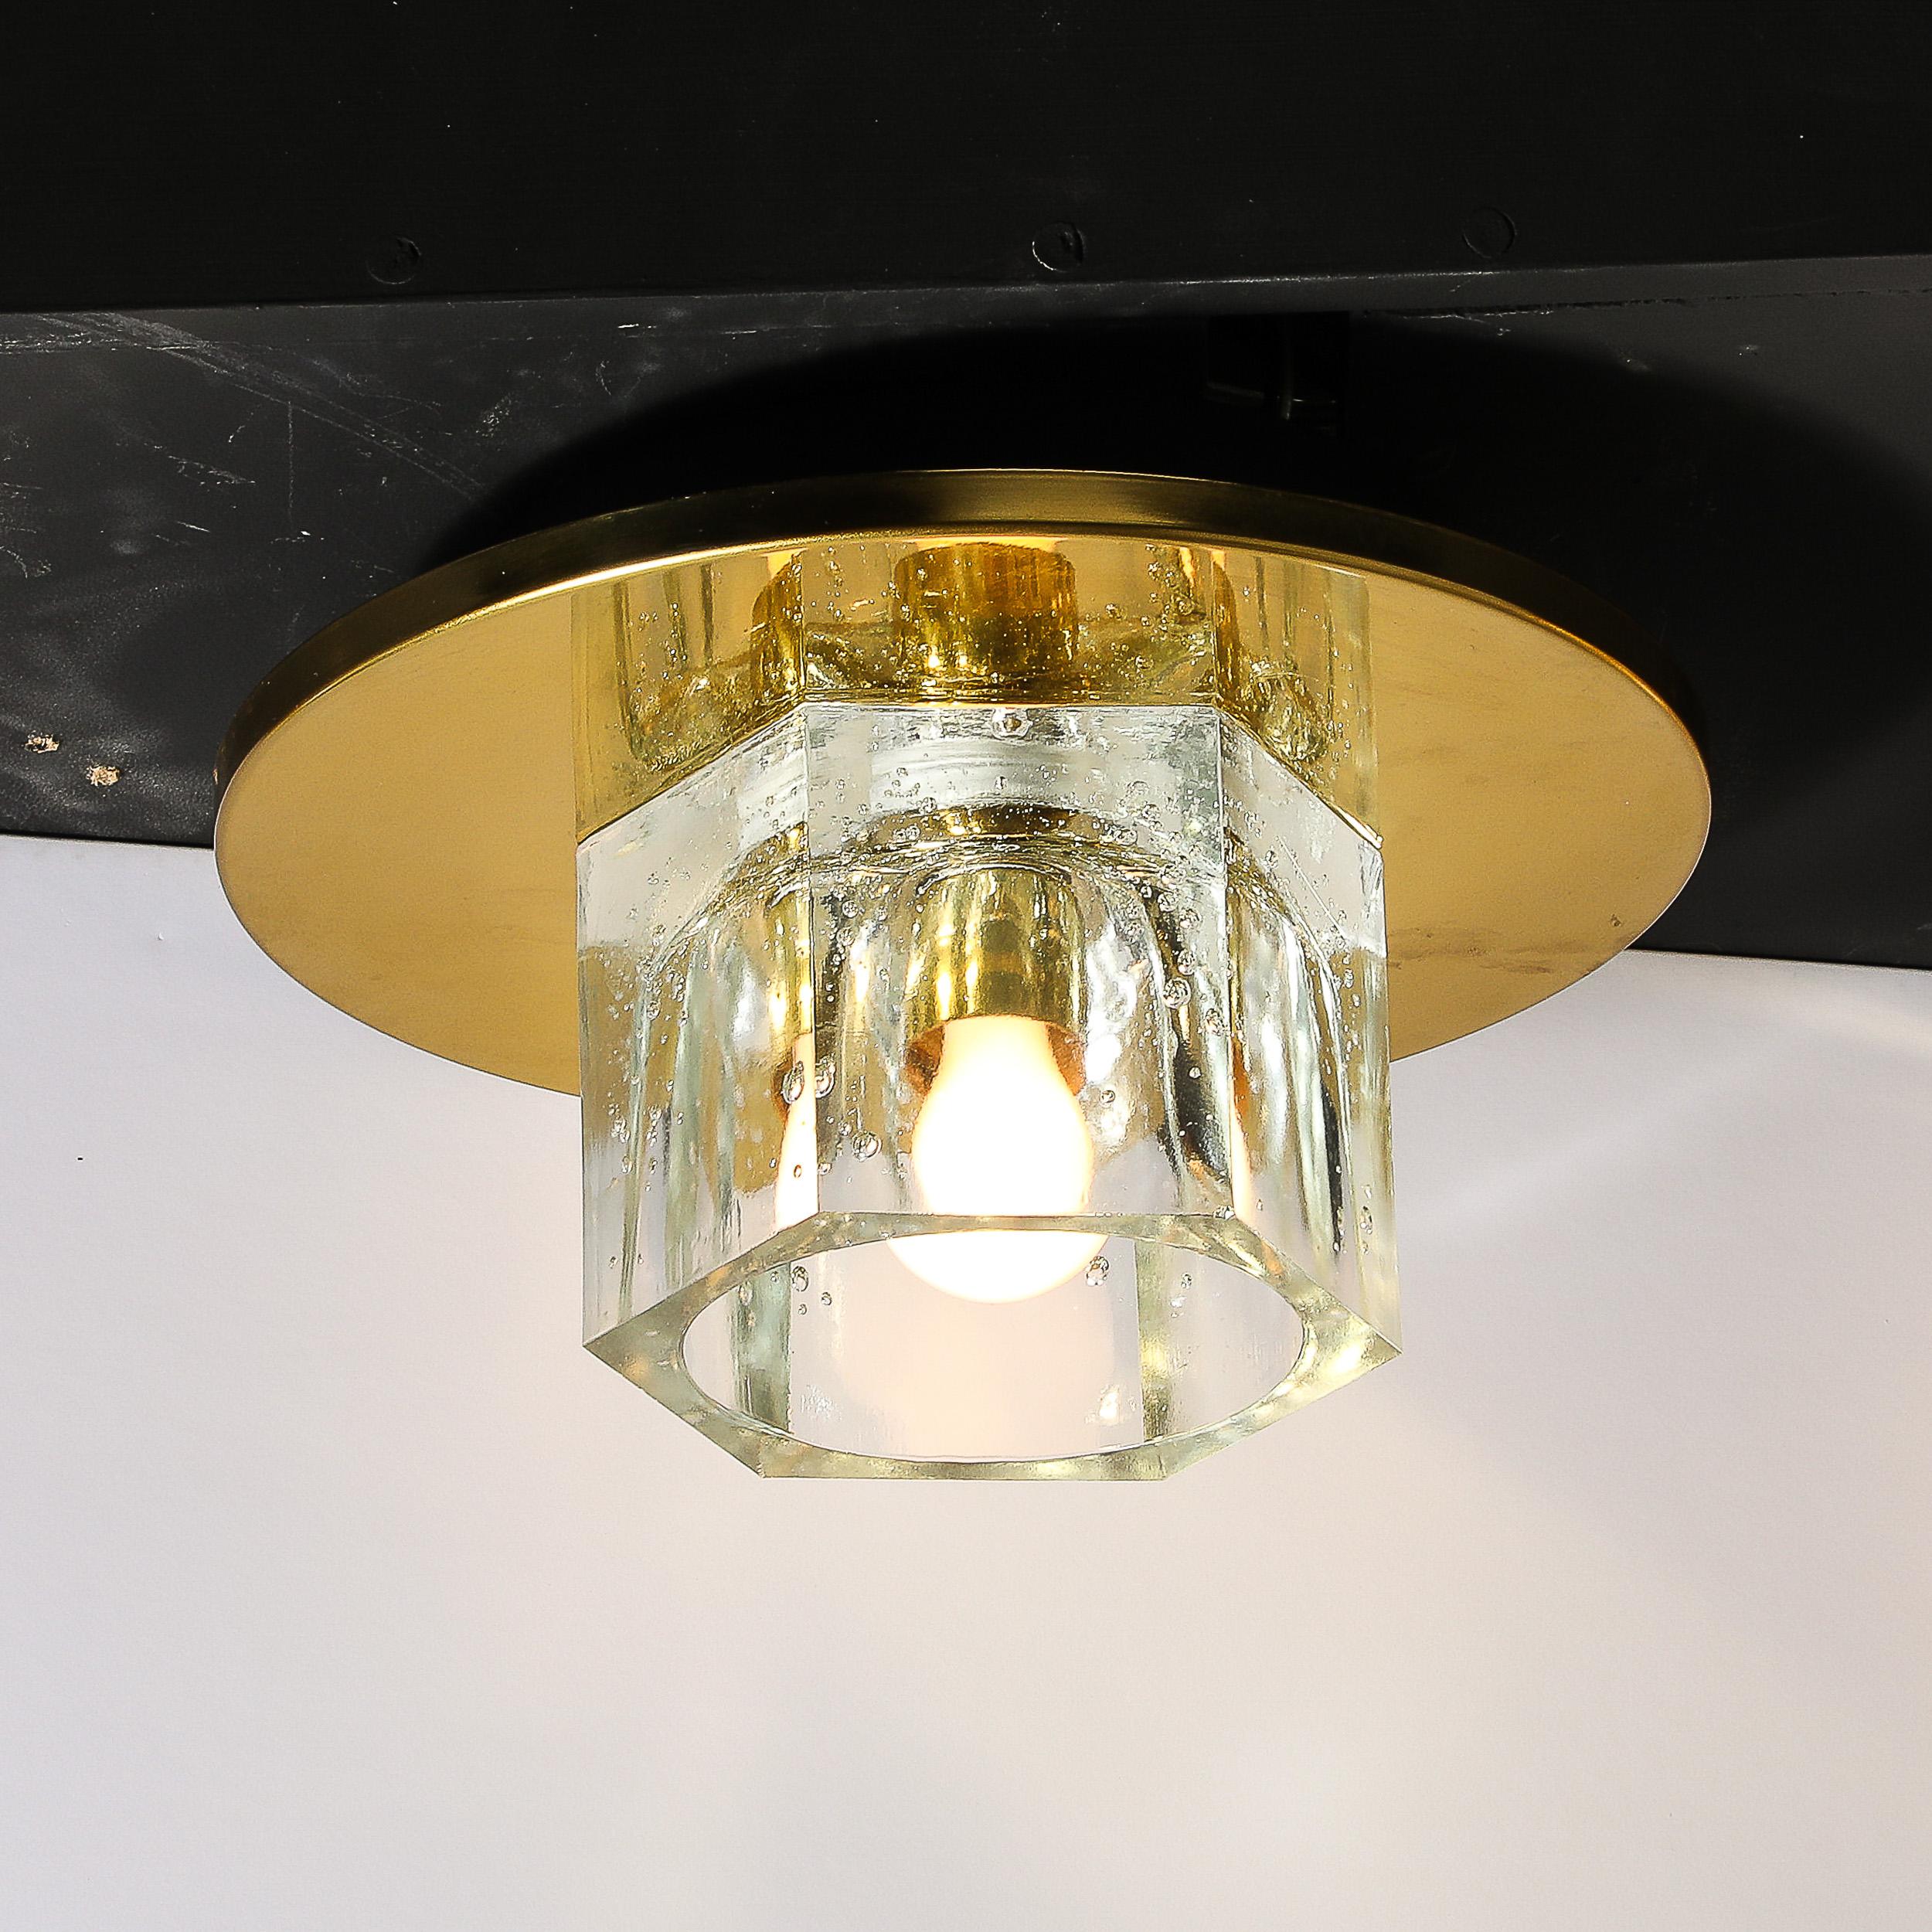 This lovely Mid-Century Modernist Hexagonal Shade Glass Flush Mount Chandelier W/Brass Fittings is by Lightolier and originates from the United States, Circa 1970. Features a hexagonal glass shade which house and diffuse the light of the bulb,